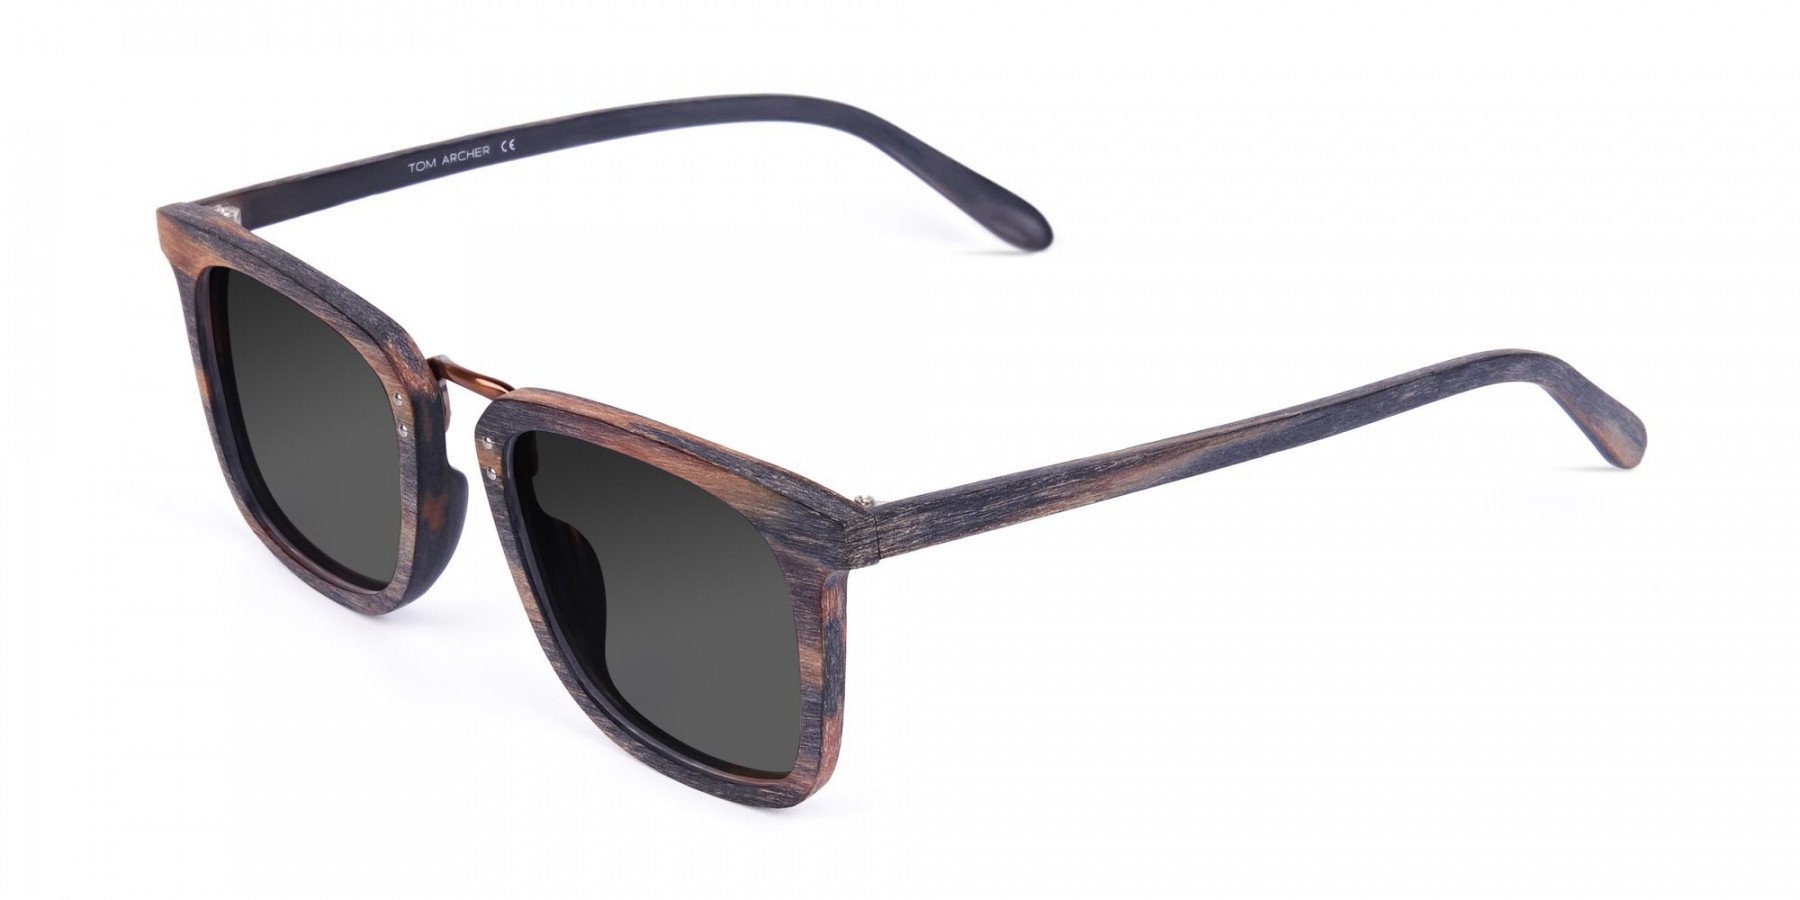 Wooden-Tortoise-Square-Sunglasses-with-Brown-Tint-1